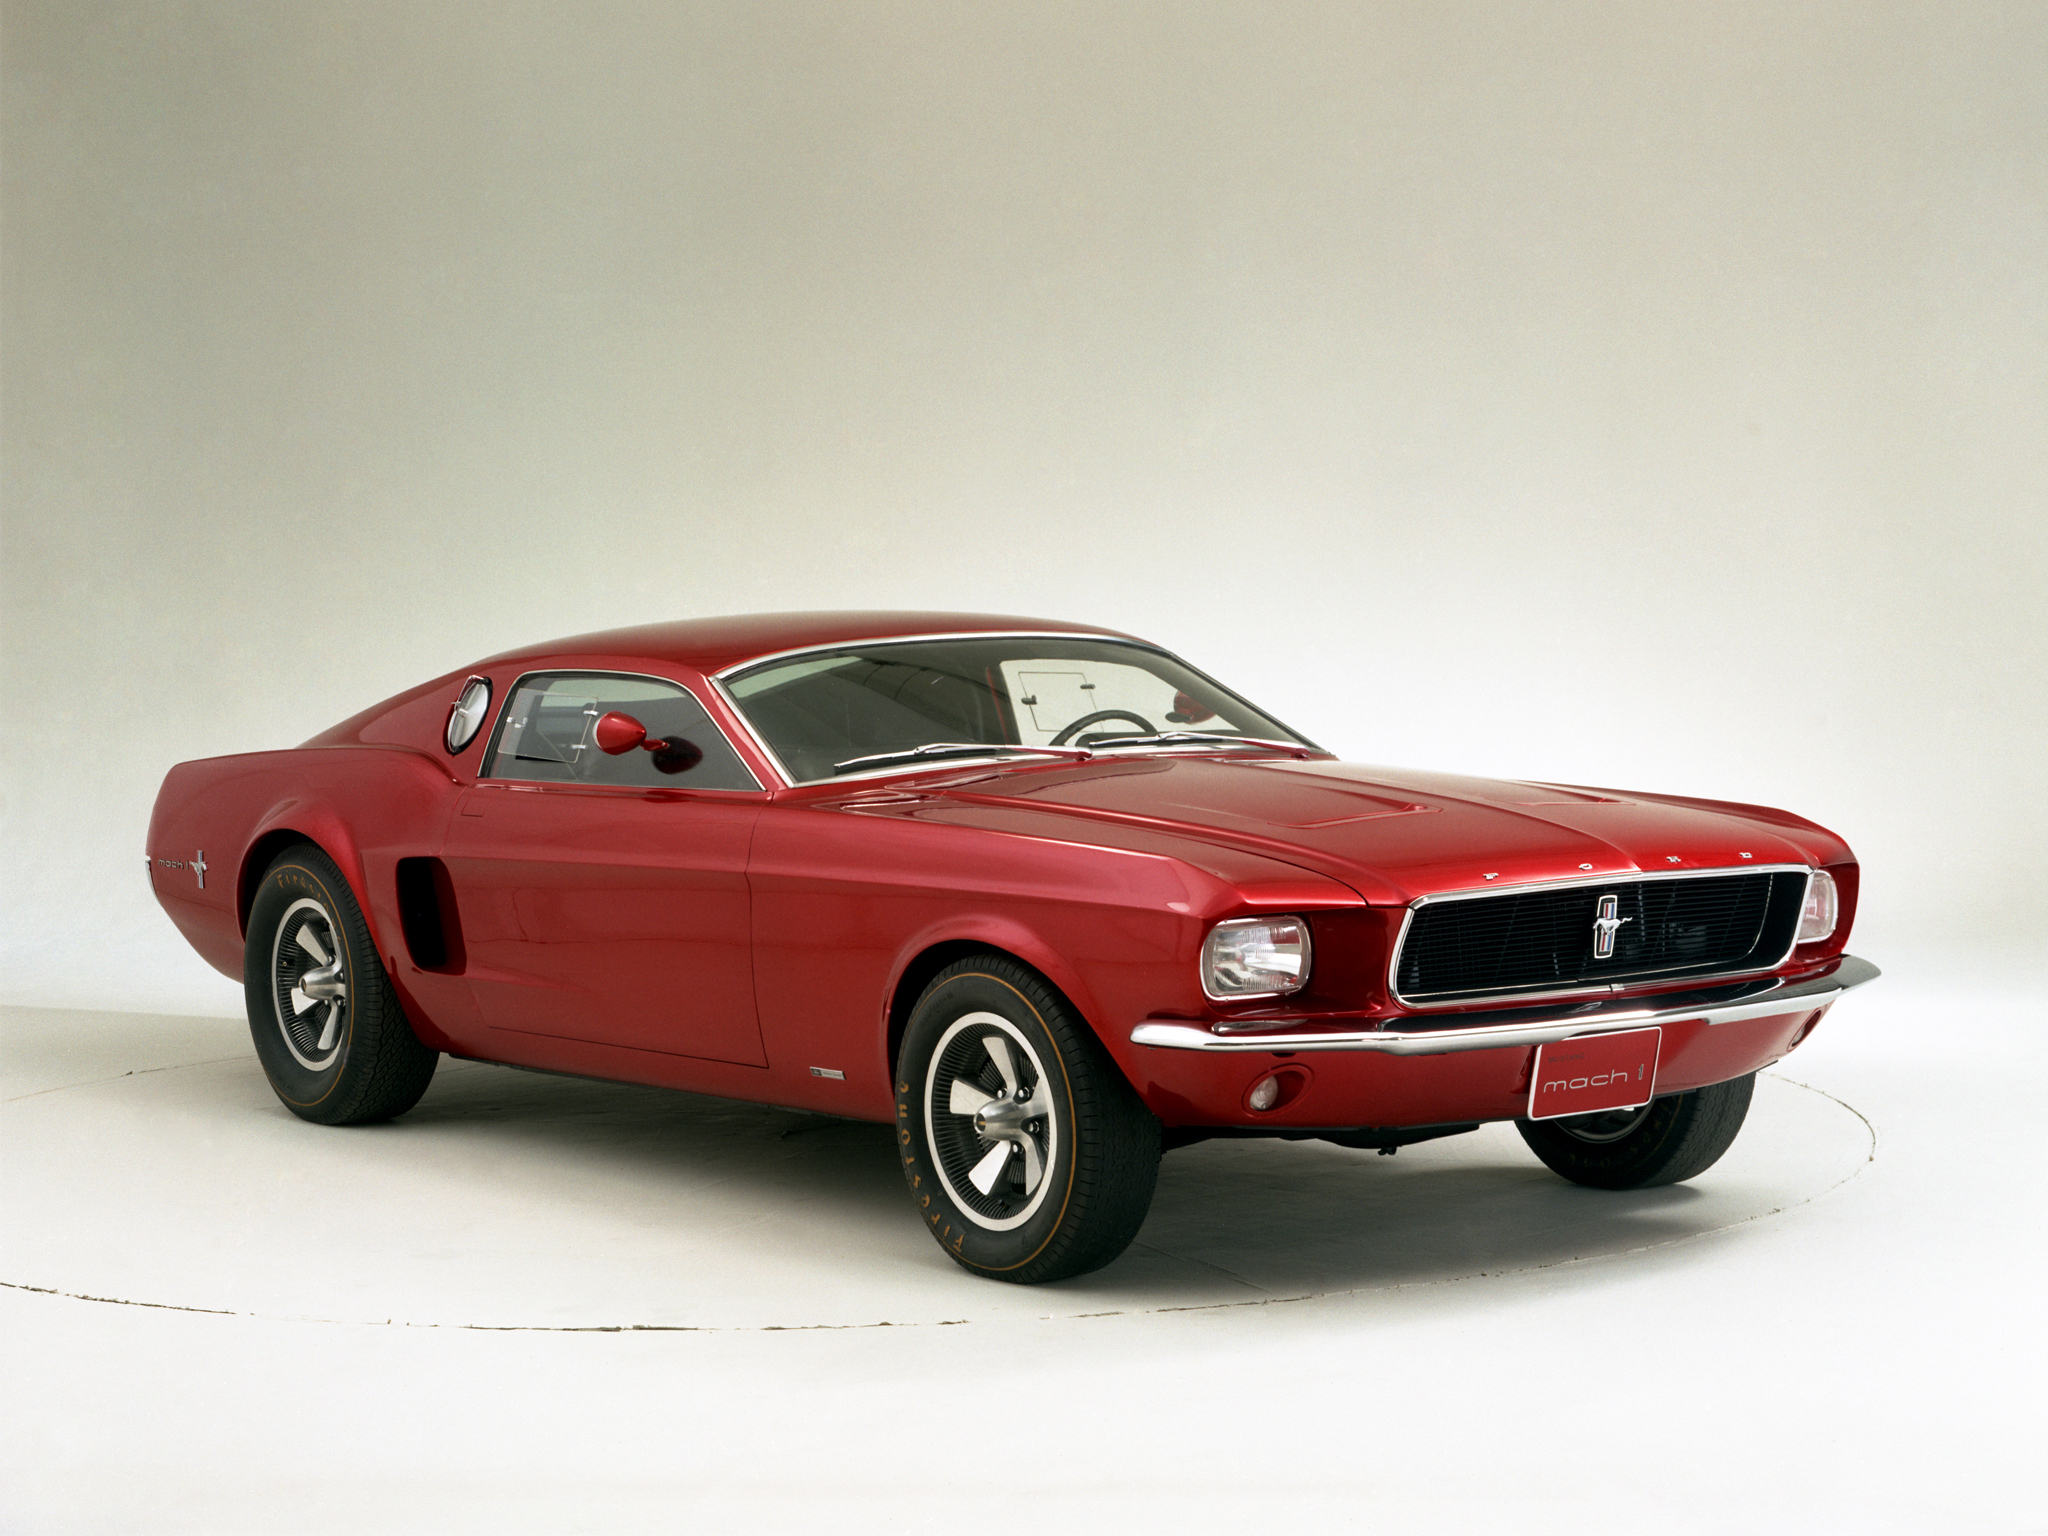 General 2048x1536 car concept cars red cars vehicle Ford Mustang Ford muscle cars American cars